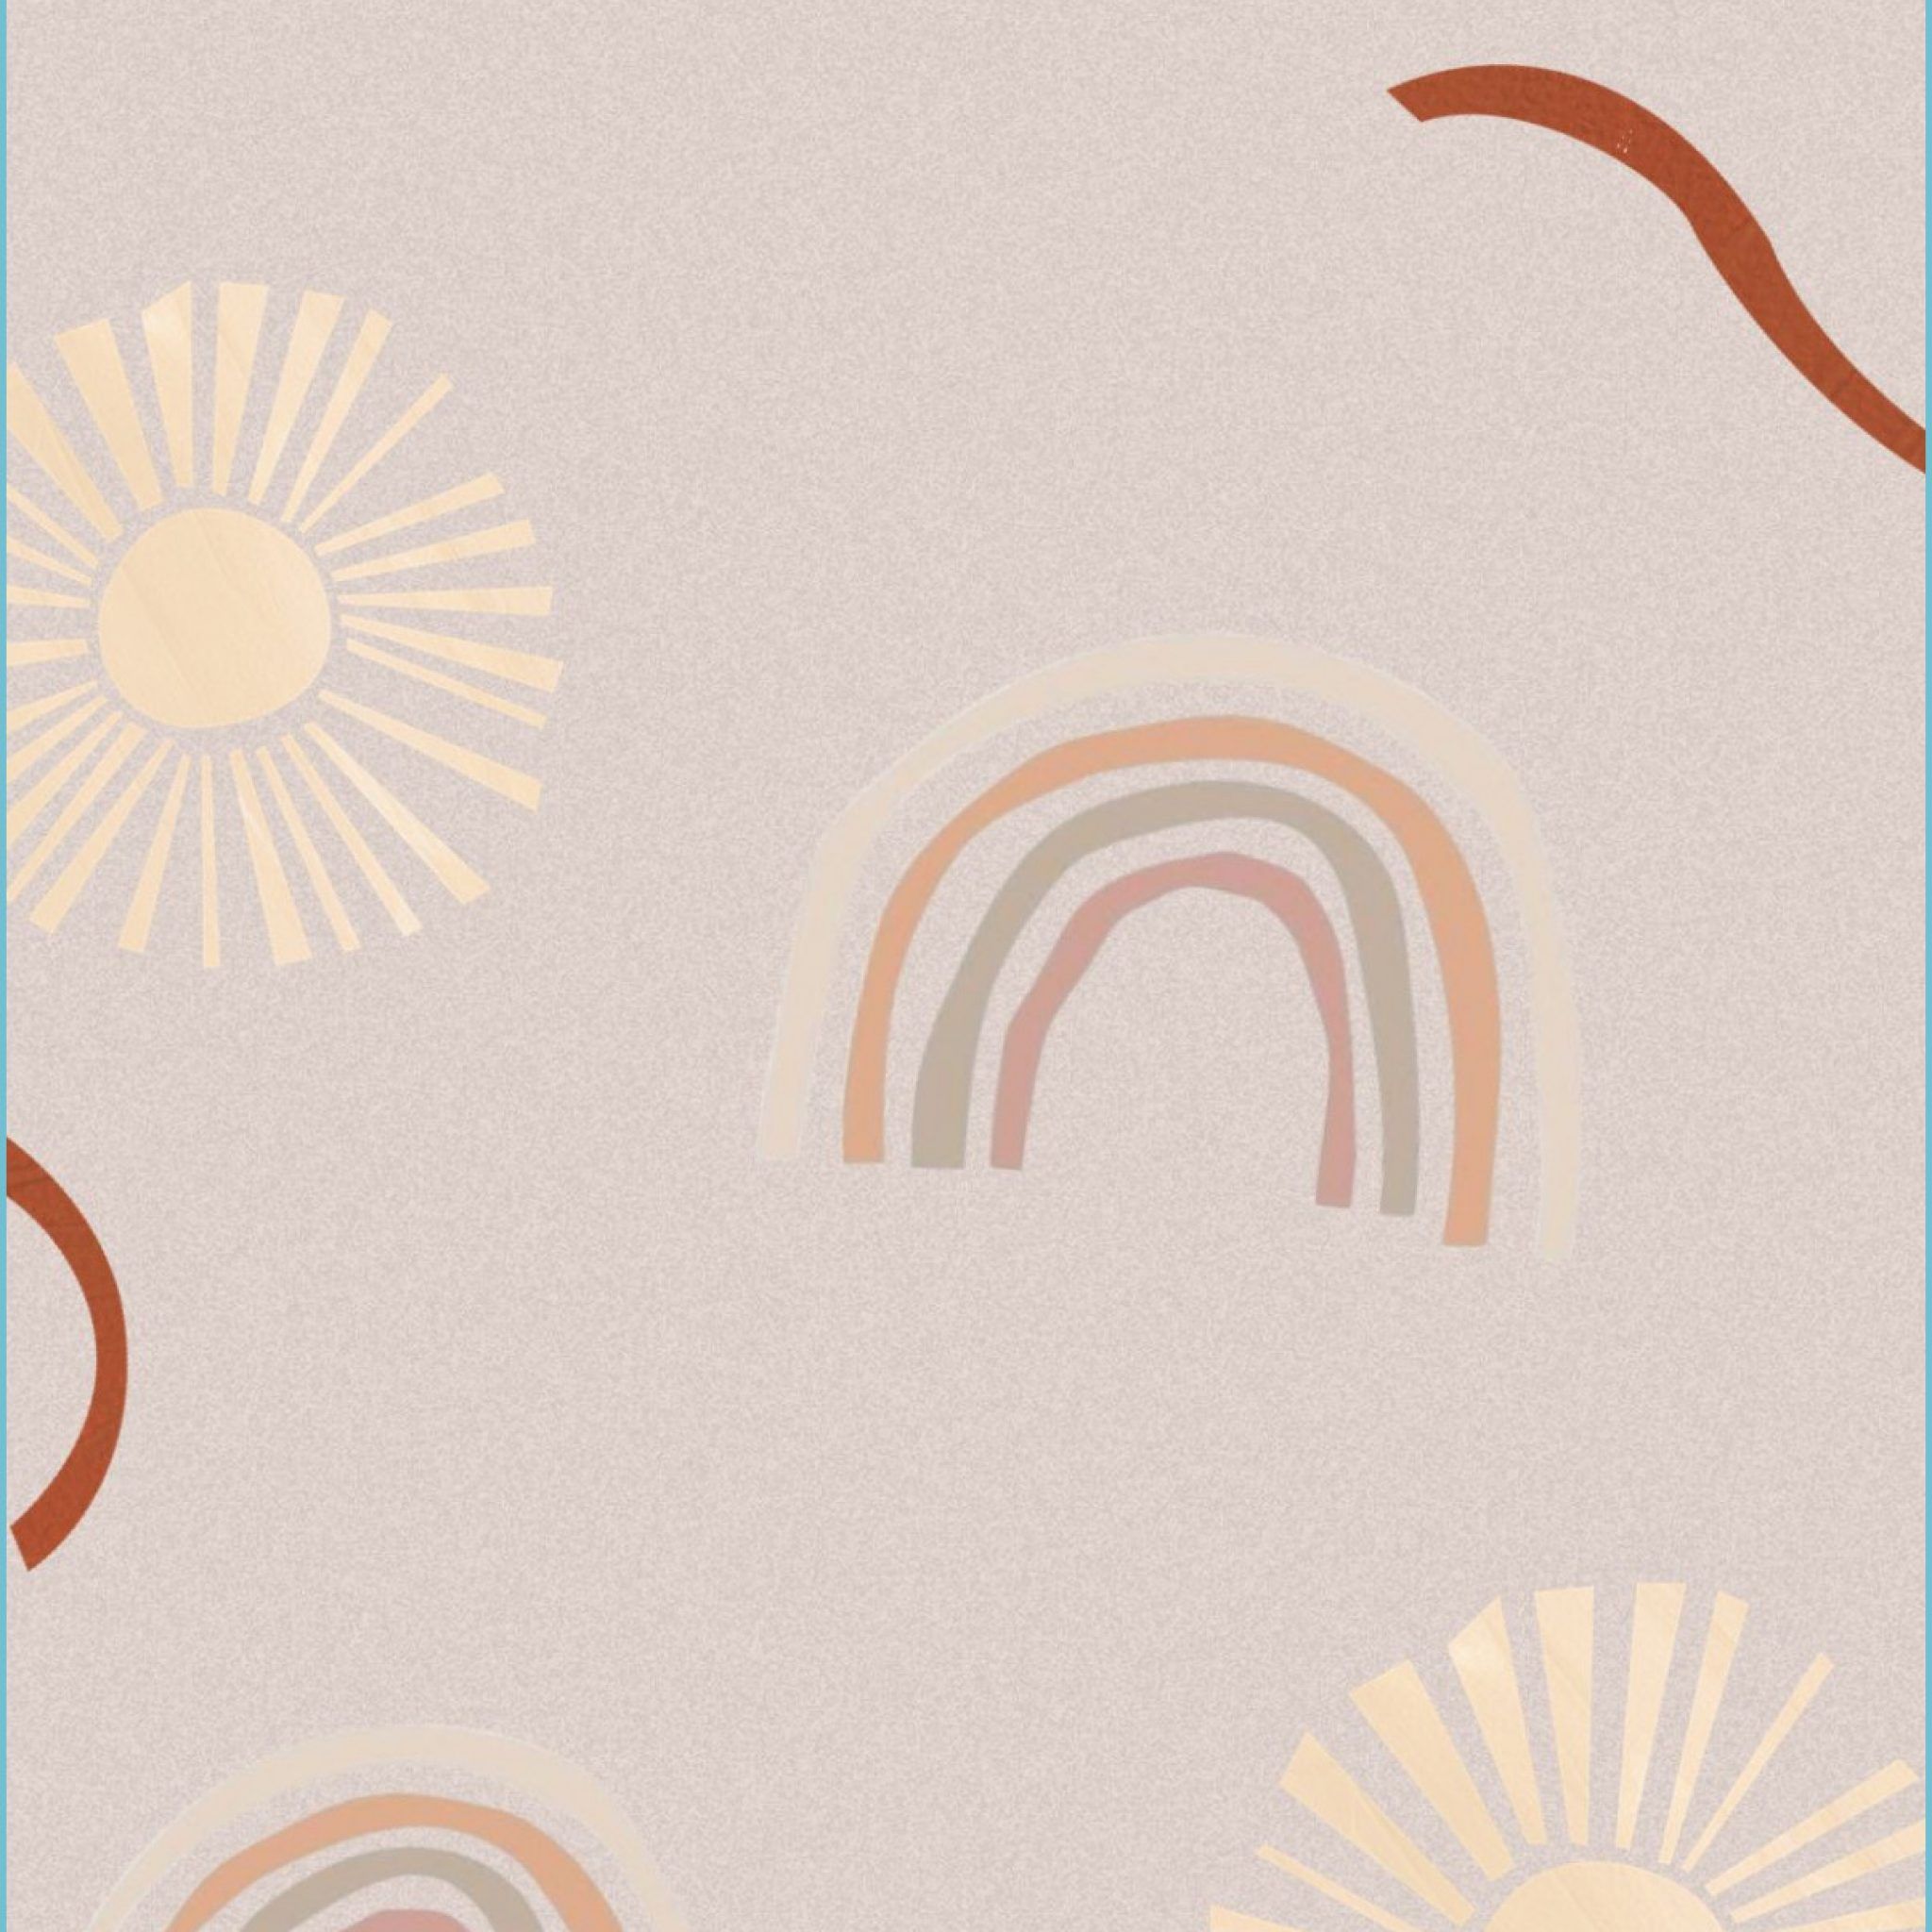 A rainbow pattern with suns in the background - Boho